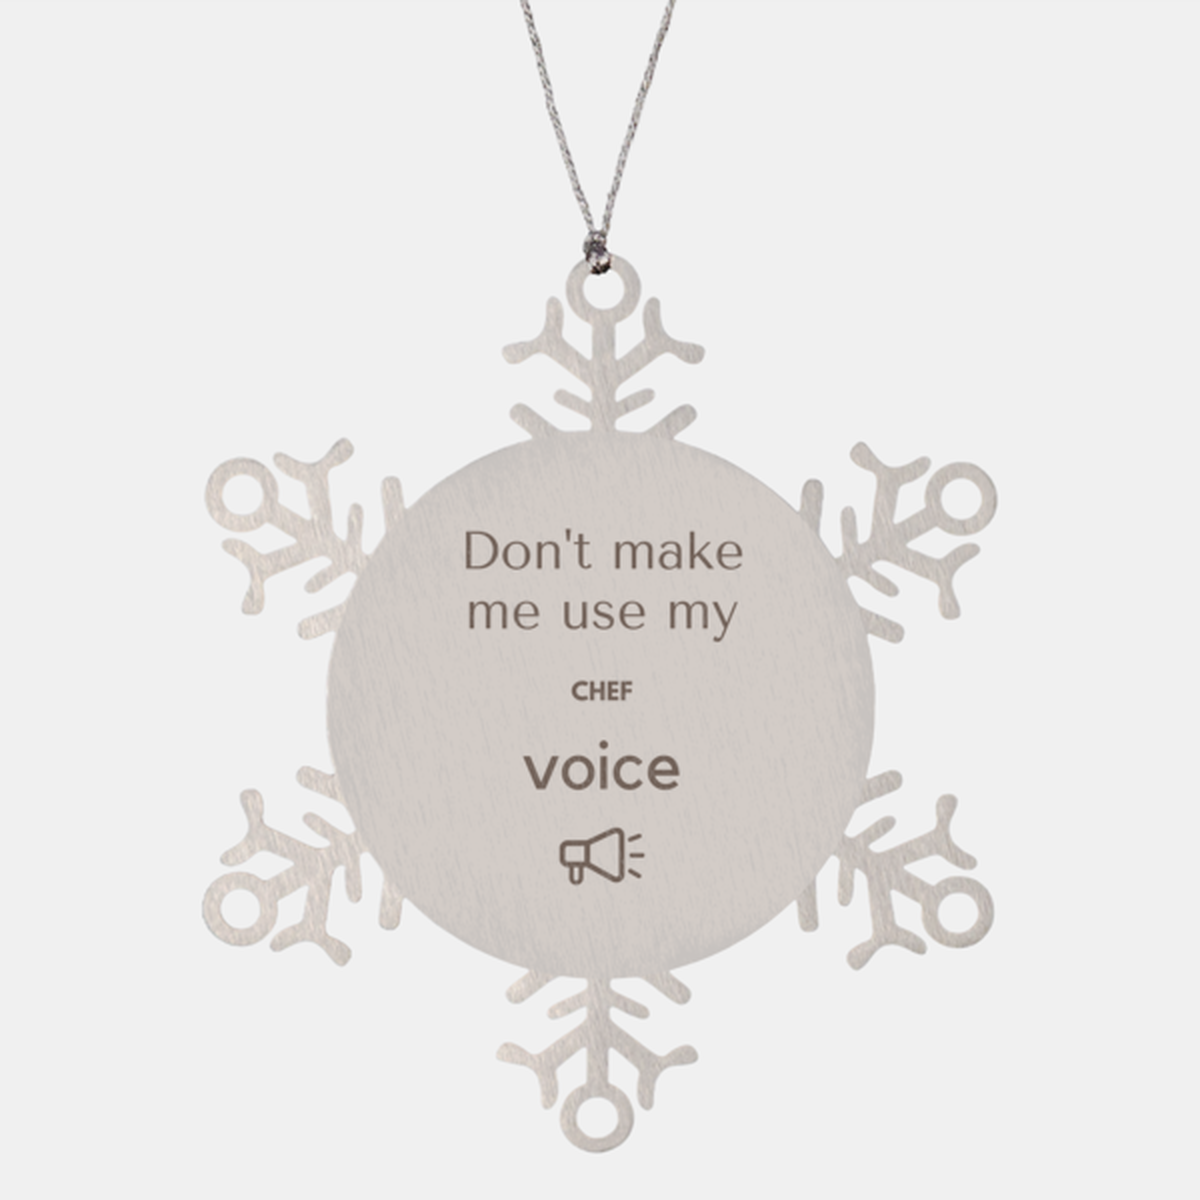 Don't make me use my Chef voice, Sarcasm Chef Ornament Gifts, Christmas Chef Snowflake Ornament Unique Gifts For Chef Coworkers, Men, Women, Colleague, Friends